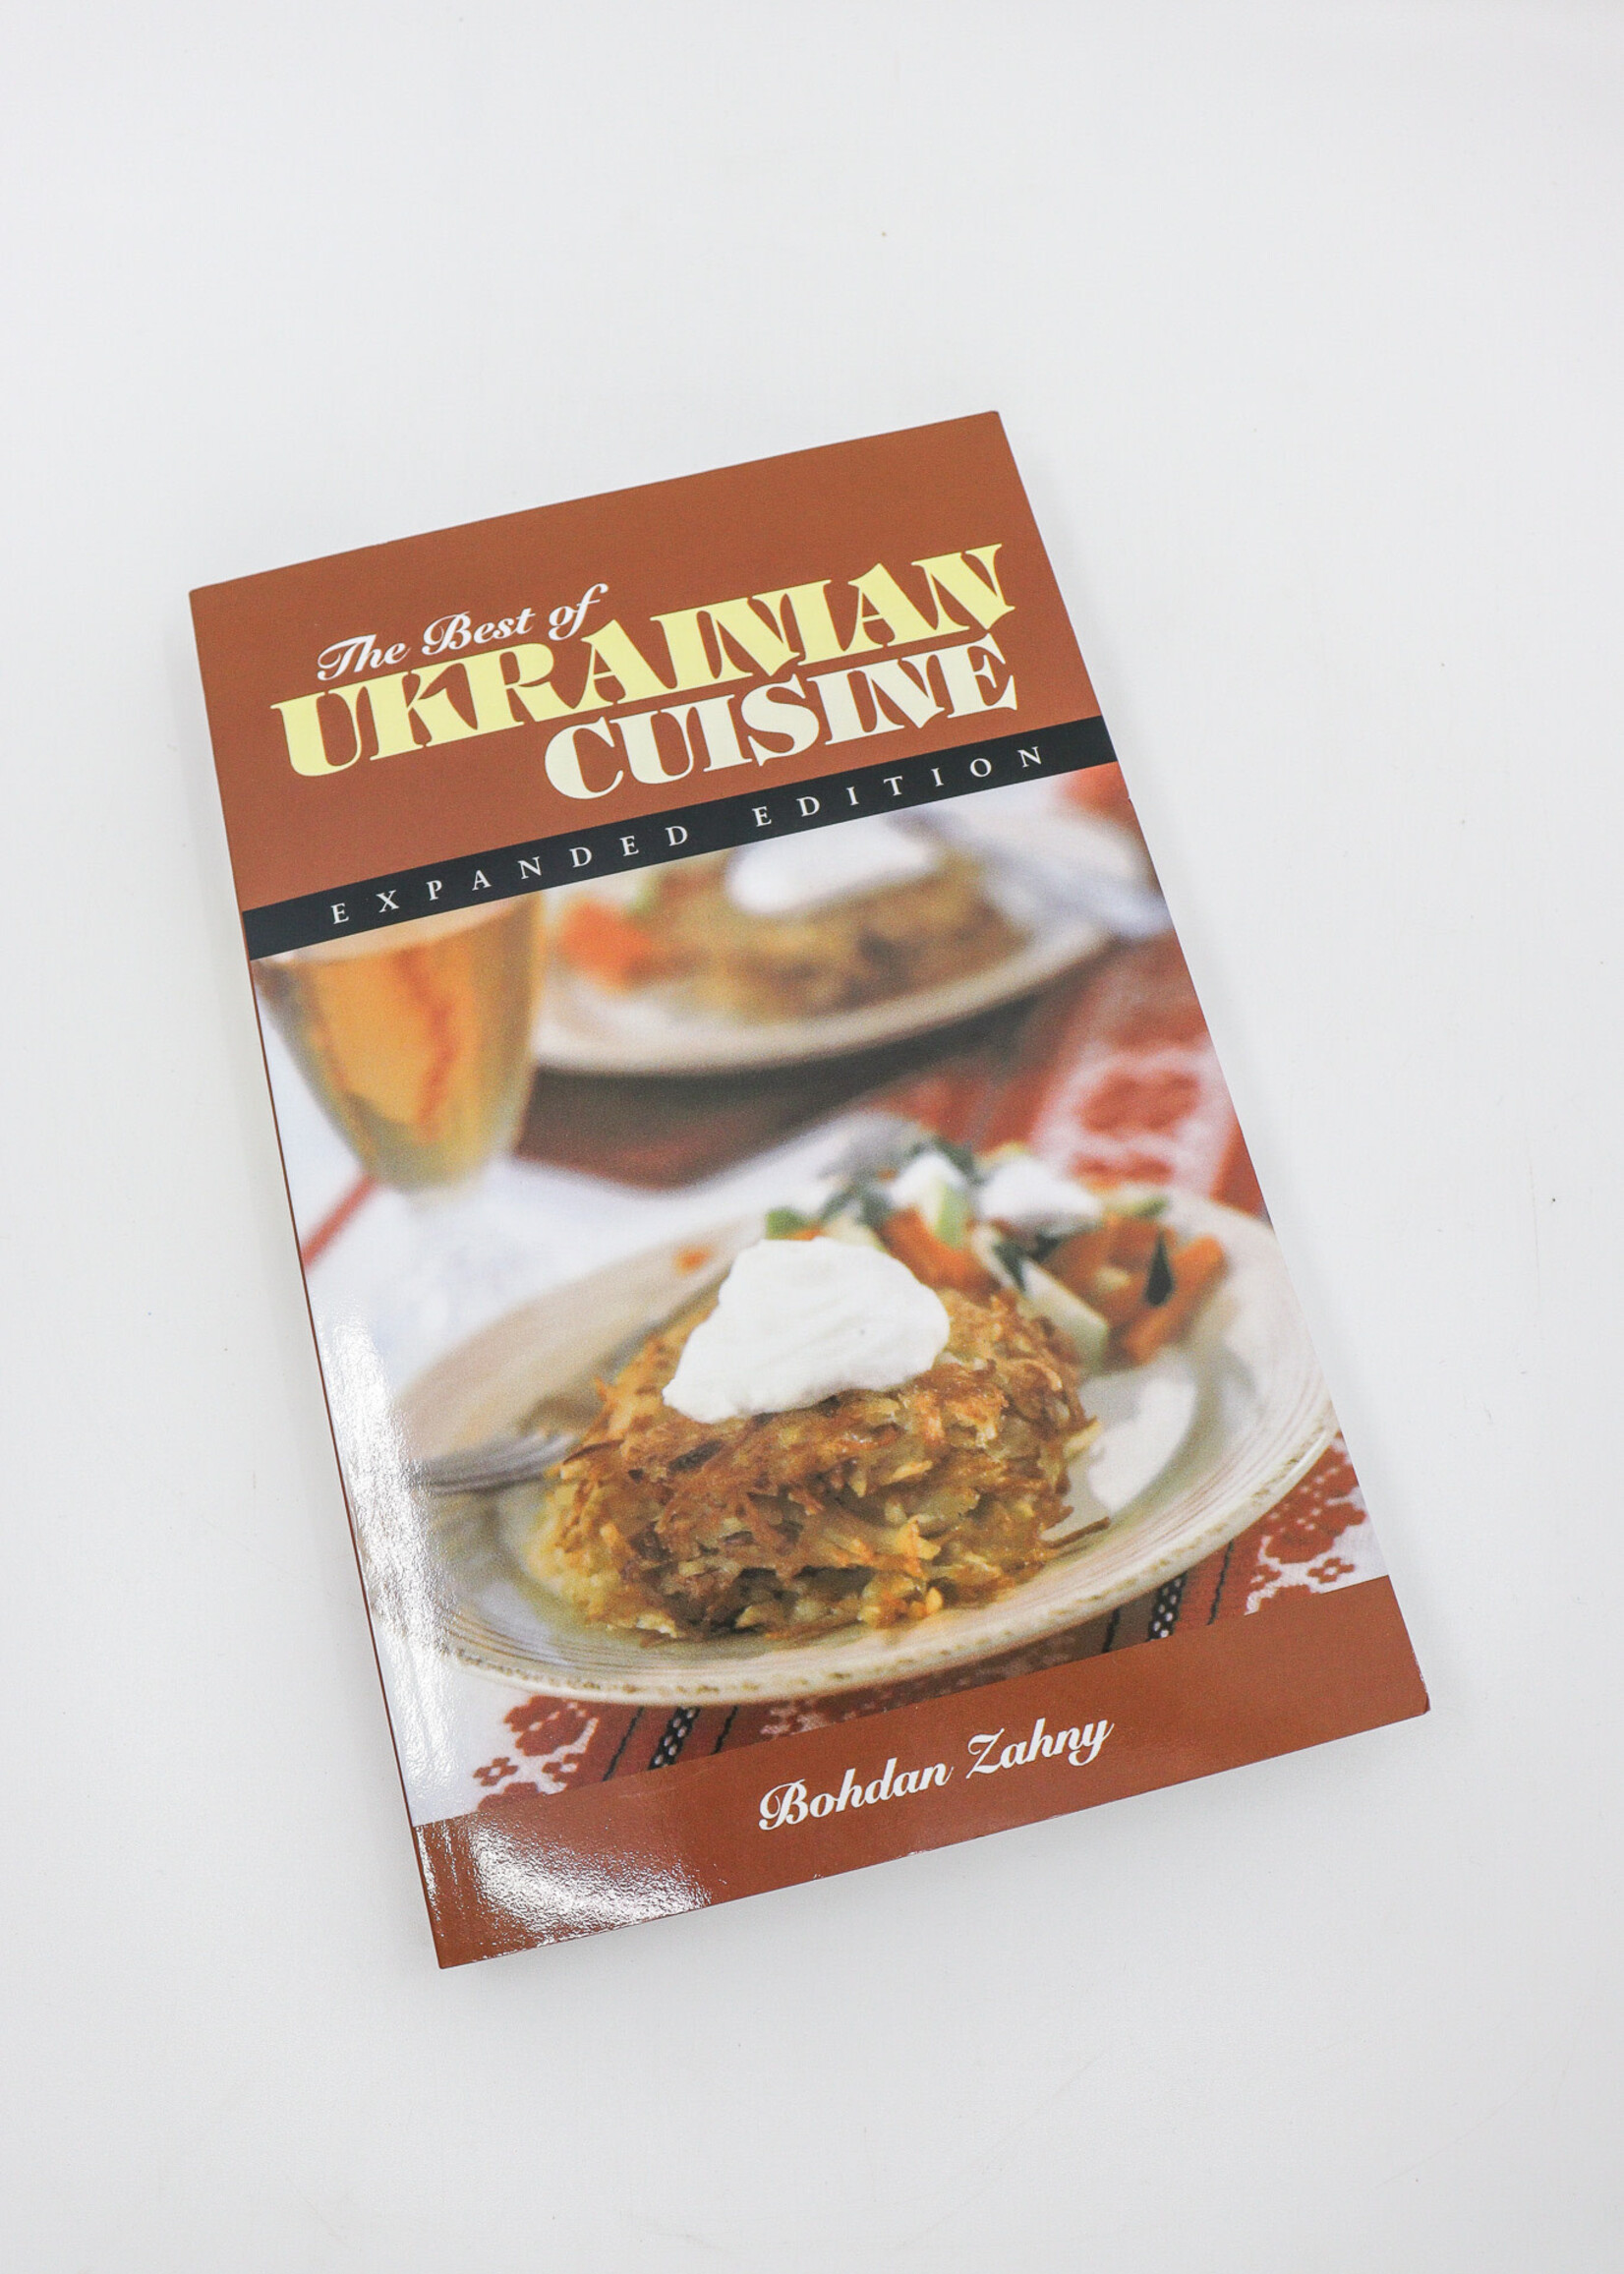 None BOOK - The Best of  Ukrainian Cuisine, expended edition by Bohdan Zahny